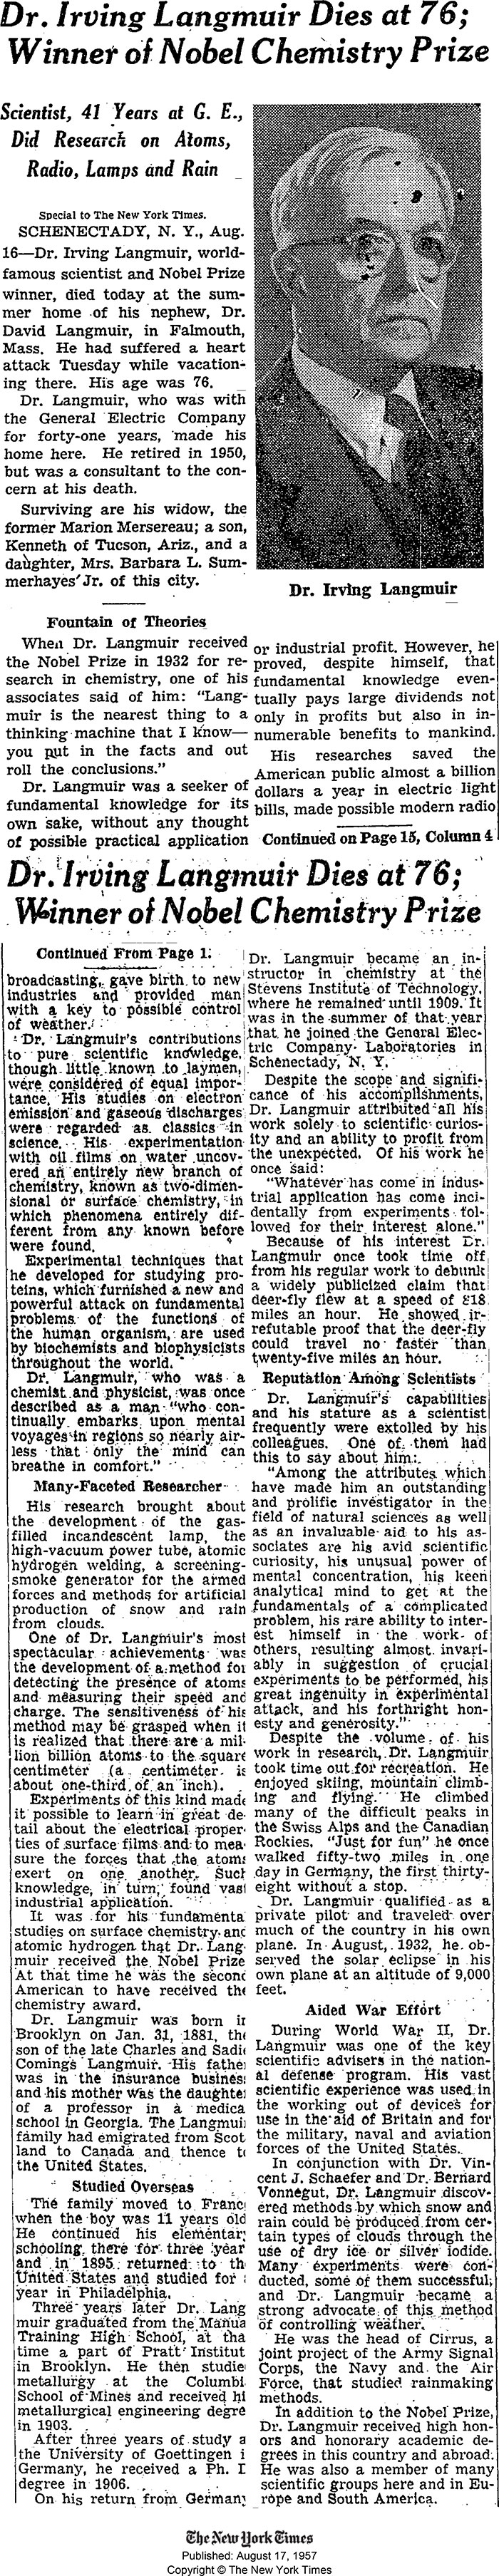 Irving Langmuir, Obituary, The New York Times, August 17, 1957 (Source: NYT)